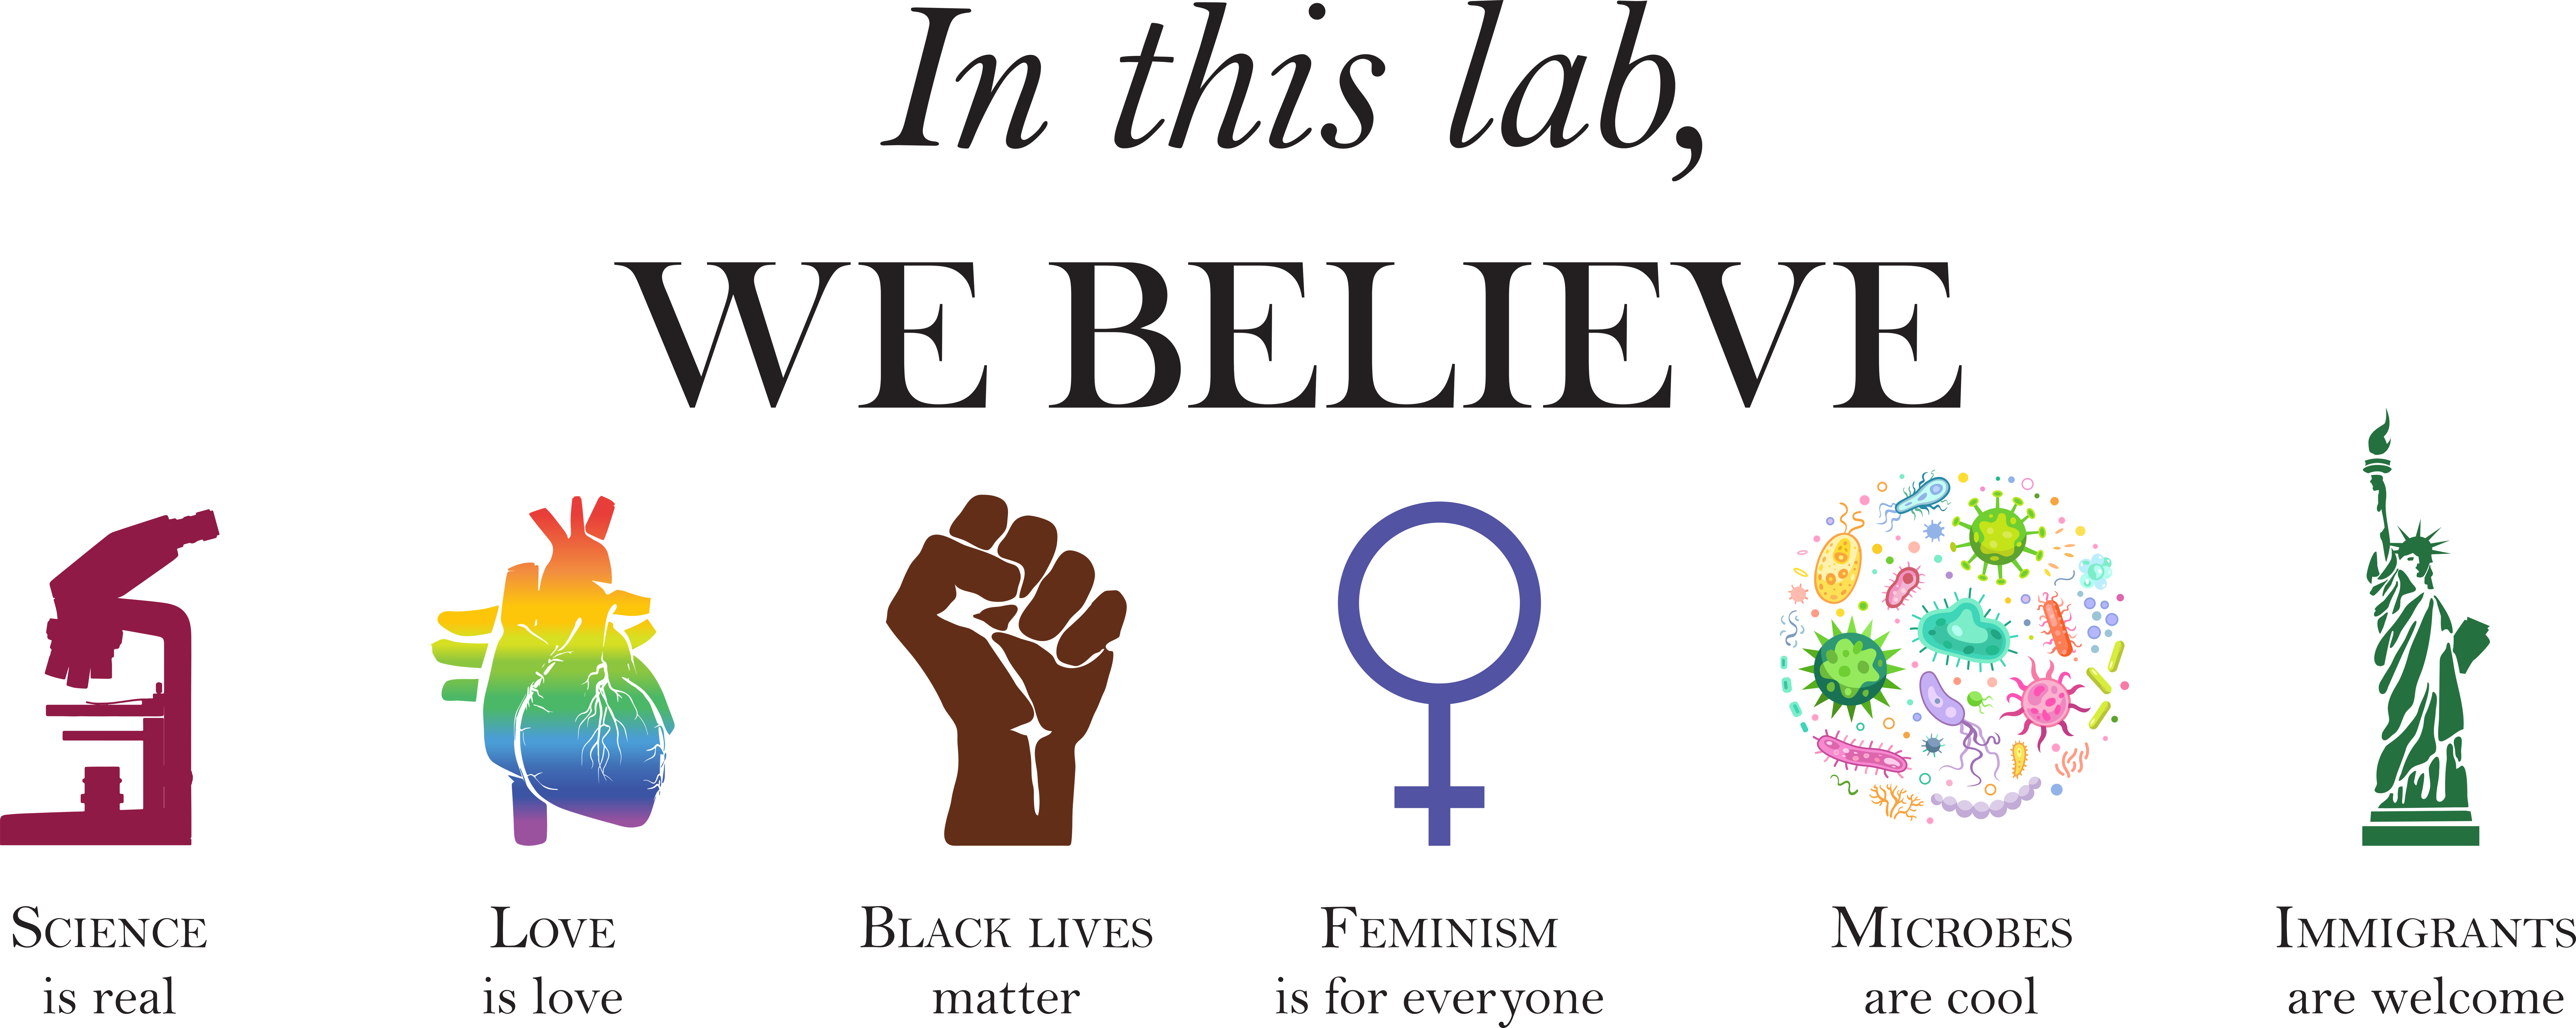 Graphic that states: "In this lab, we believe Science is real, Love is love, Black Lives Matter, Feminism if for everyone, Microbes are Cool, and Immigrants are welcome"